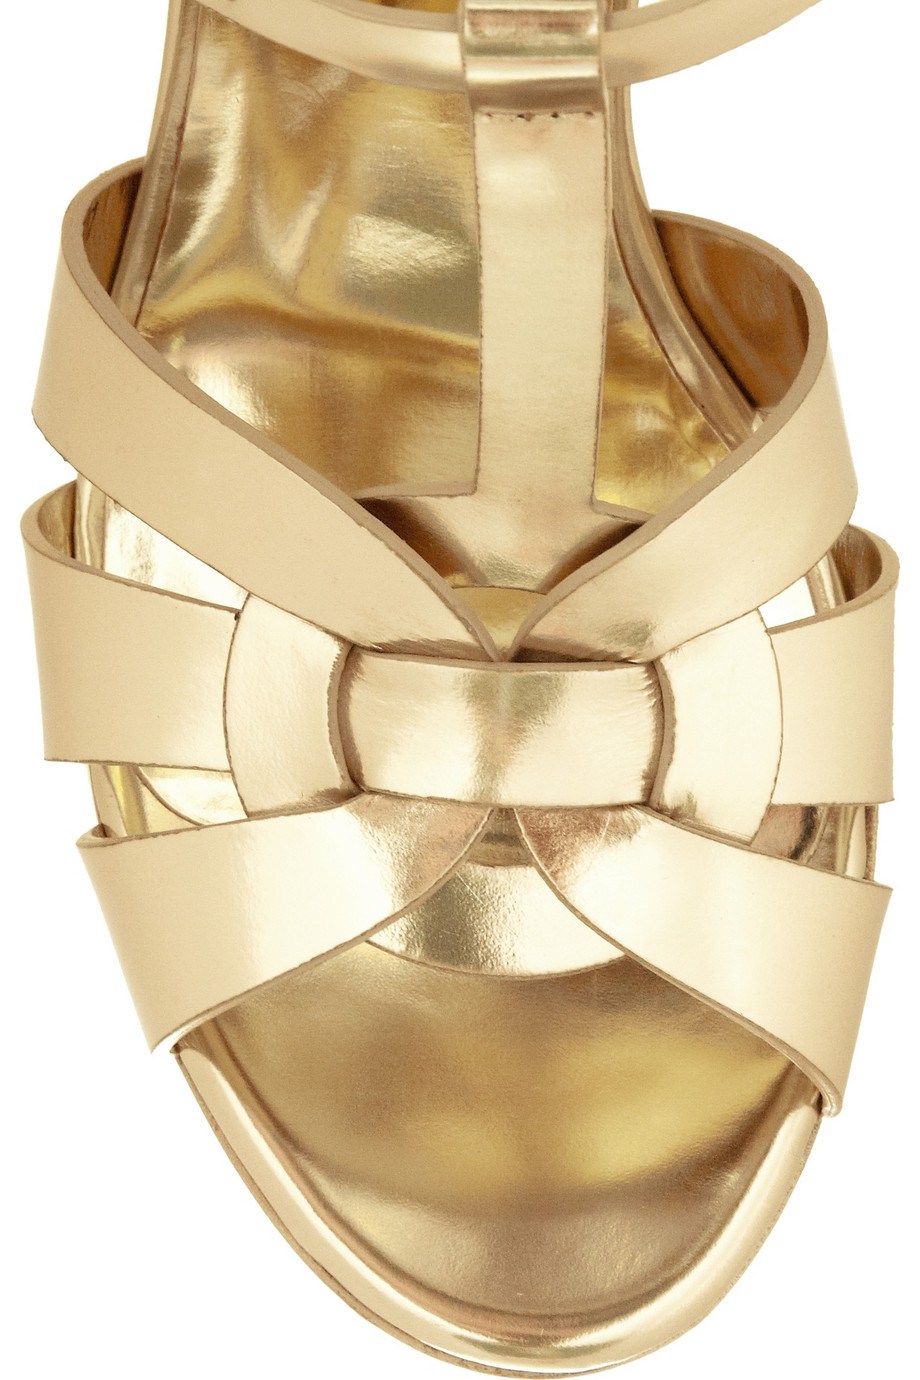 Saint Laurent Tribute Mirrored Leather Sandals in Gold (Metallic) - Lyst